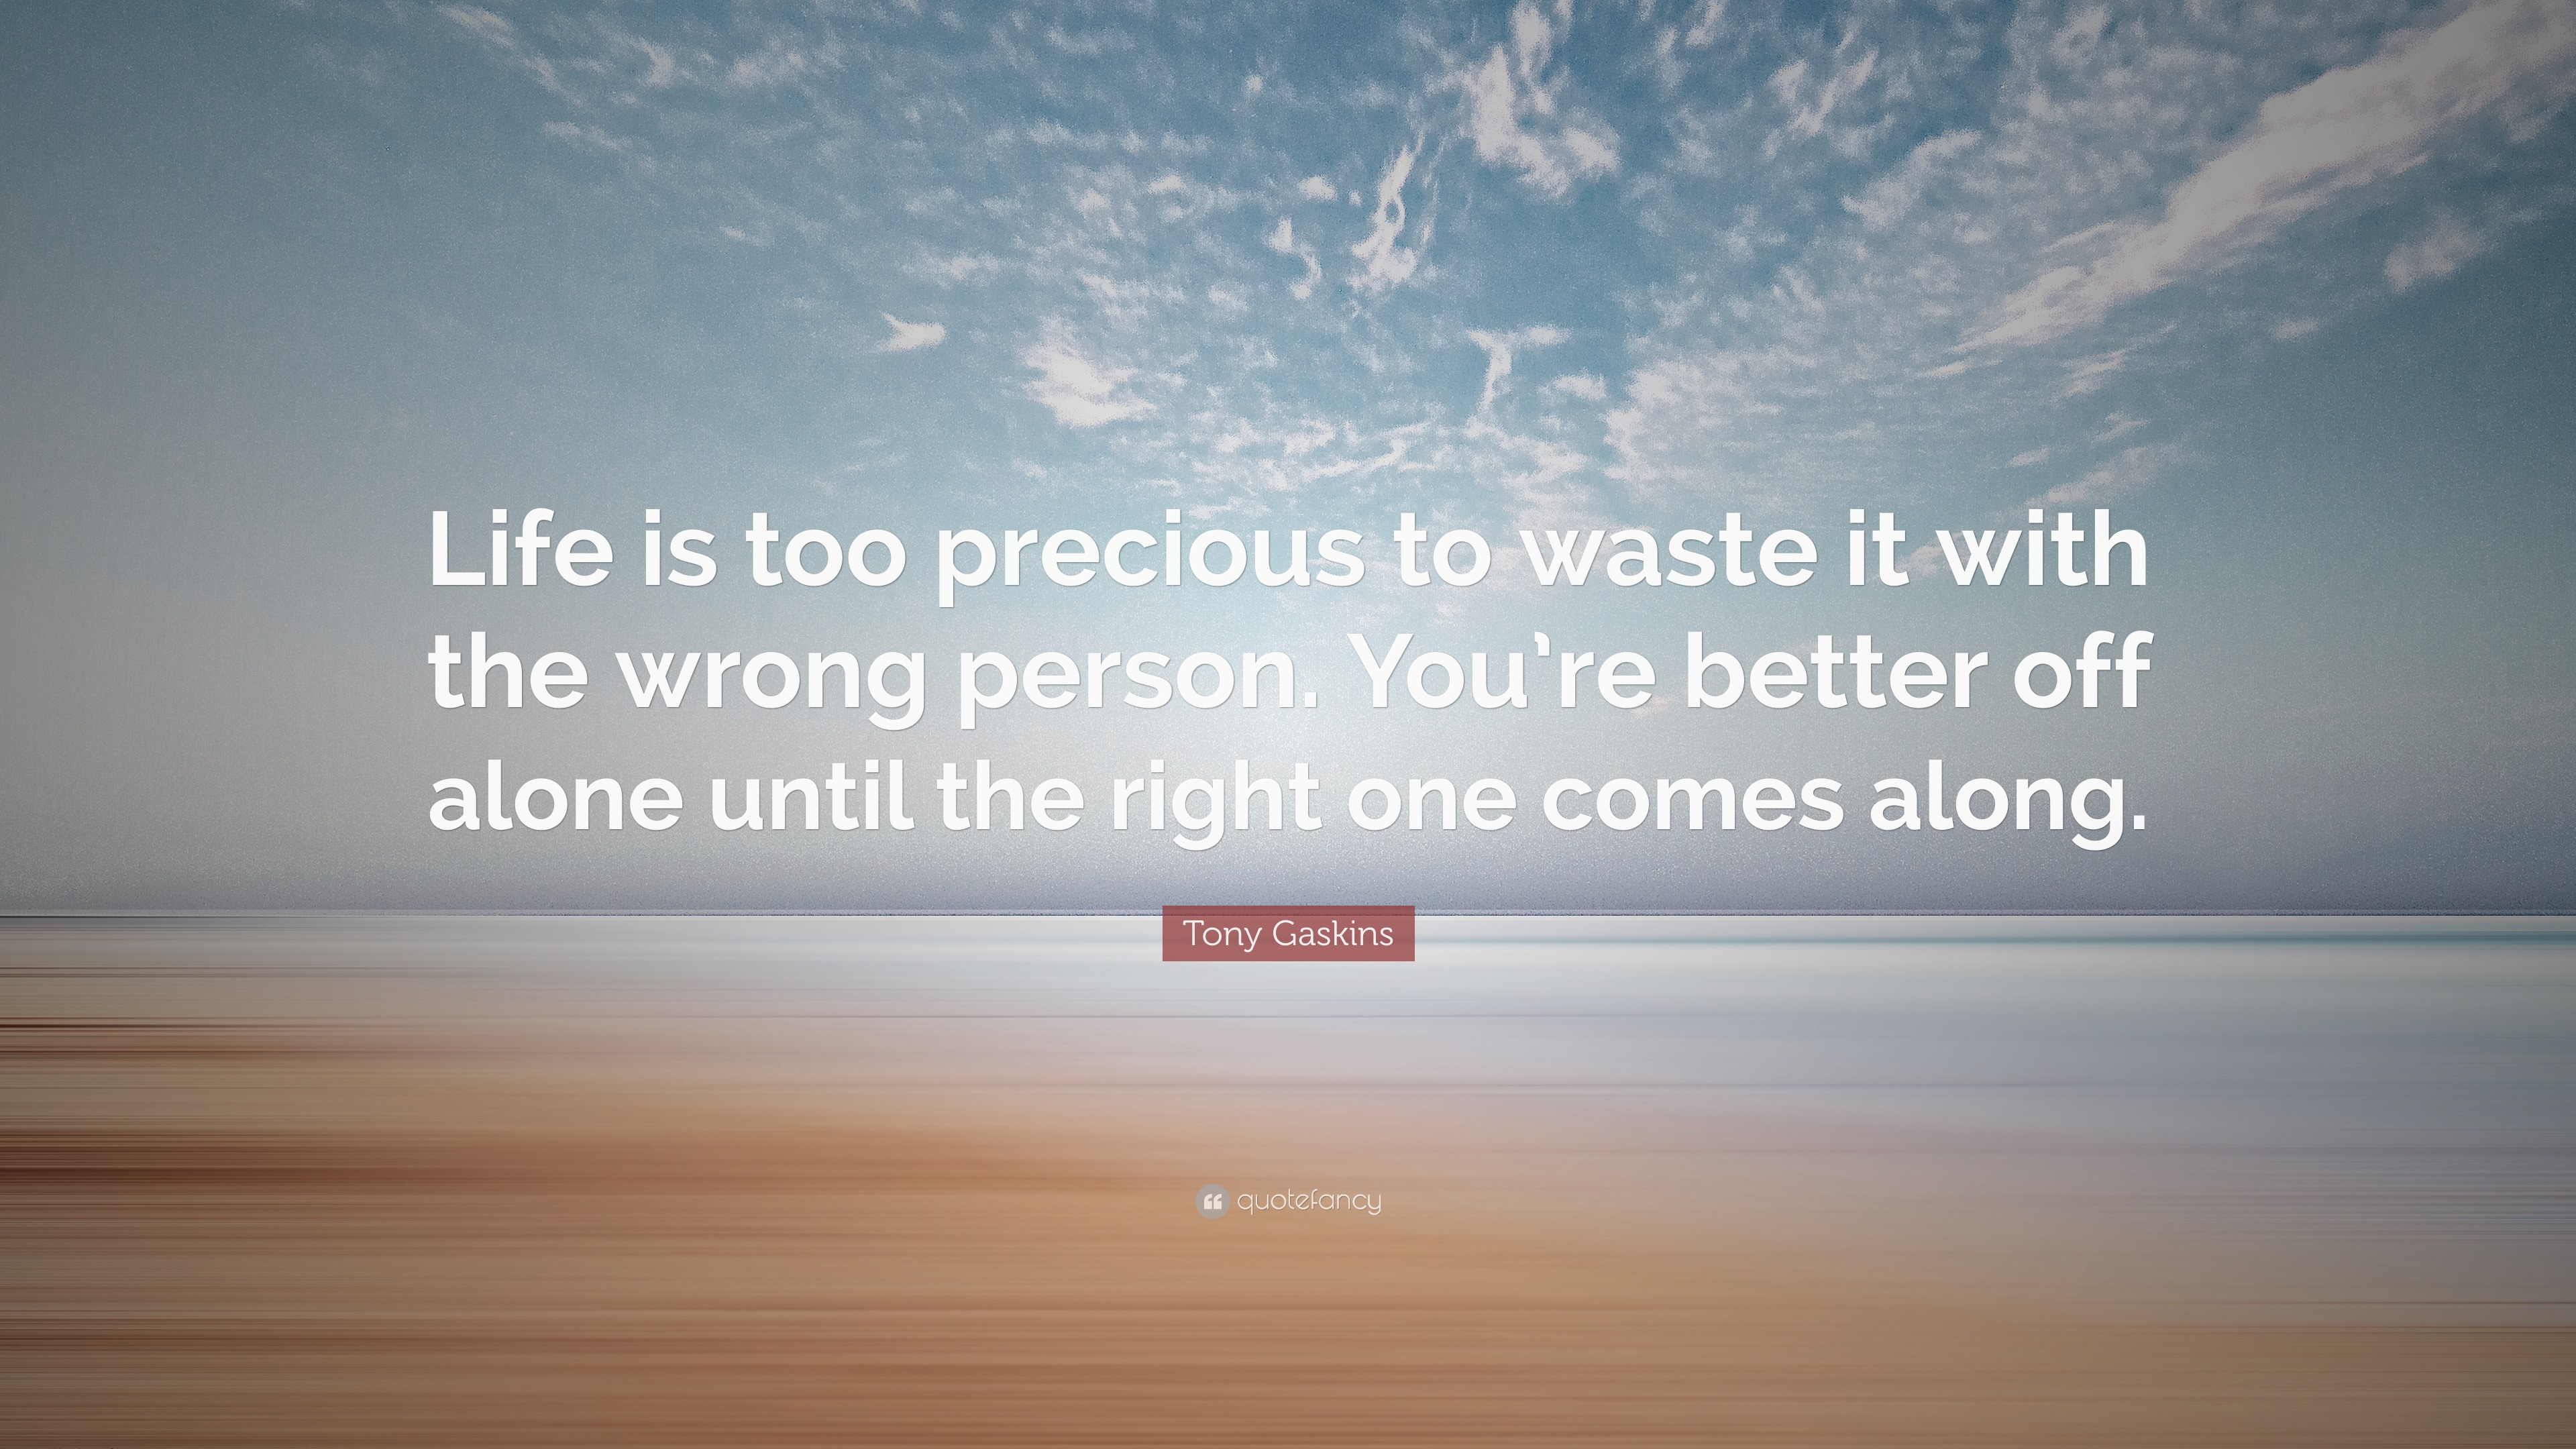 Tony Gaskins Quote “Life is too precious to waste it with the wrong